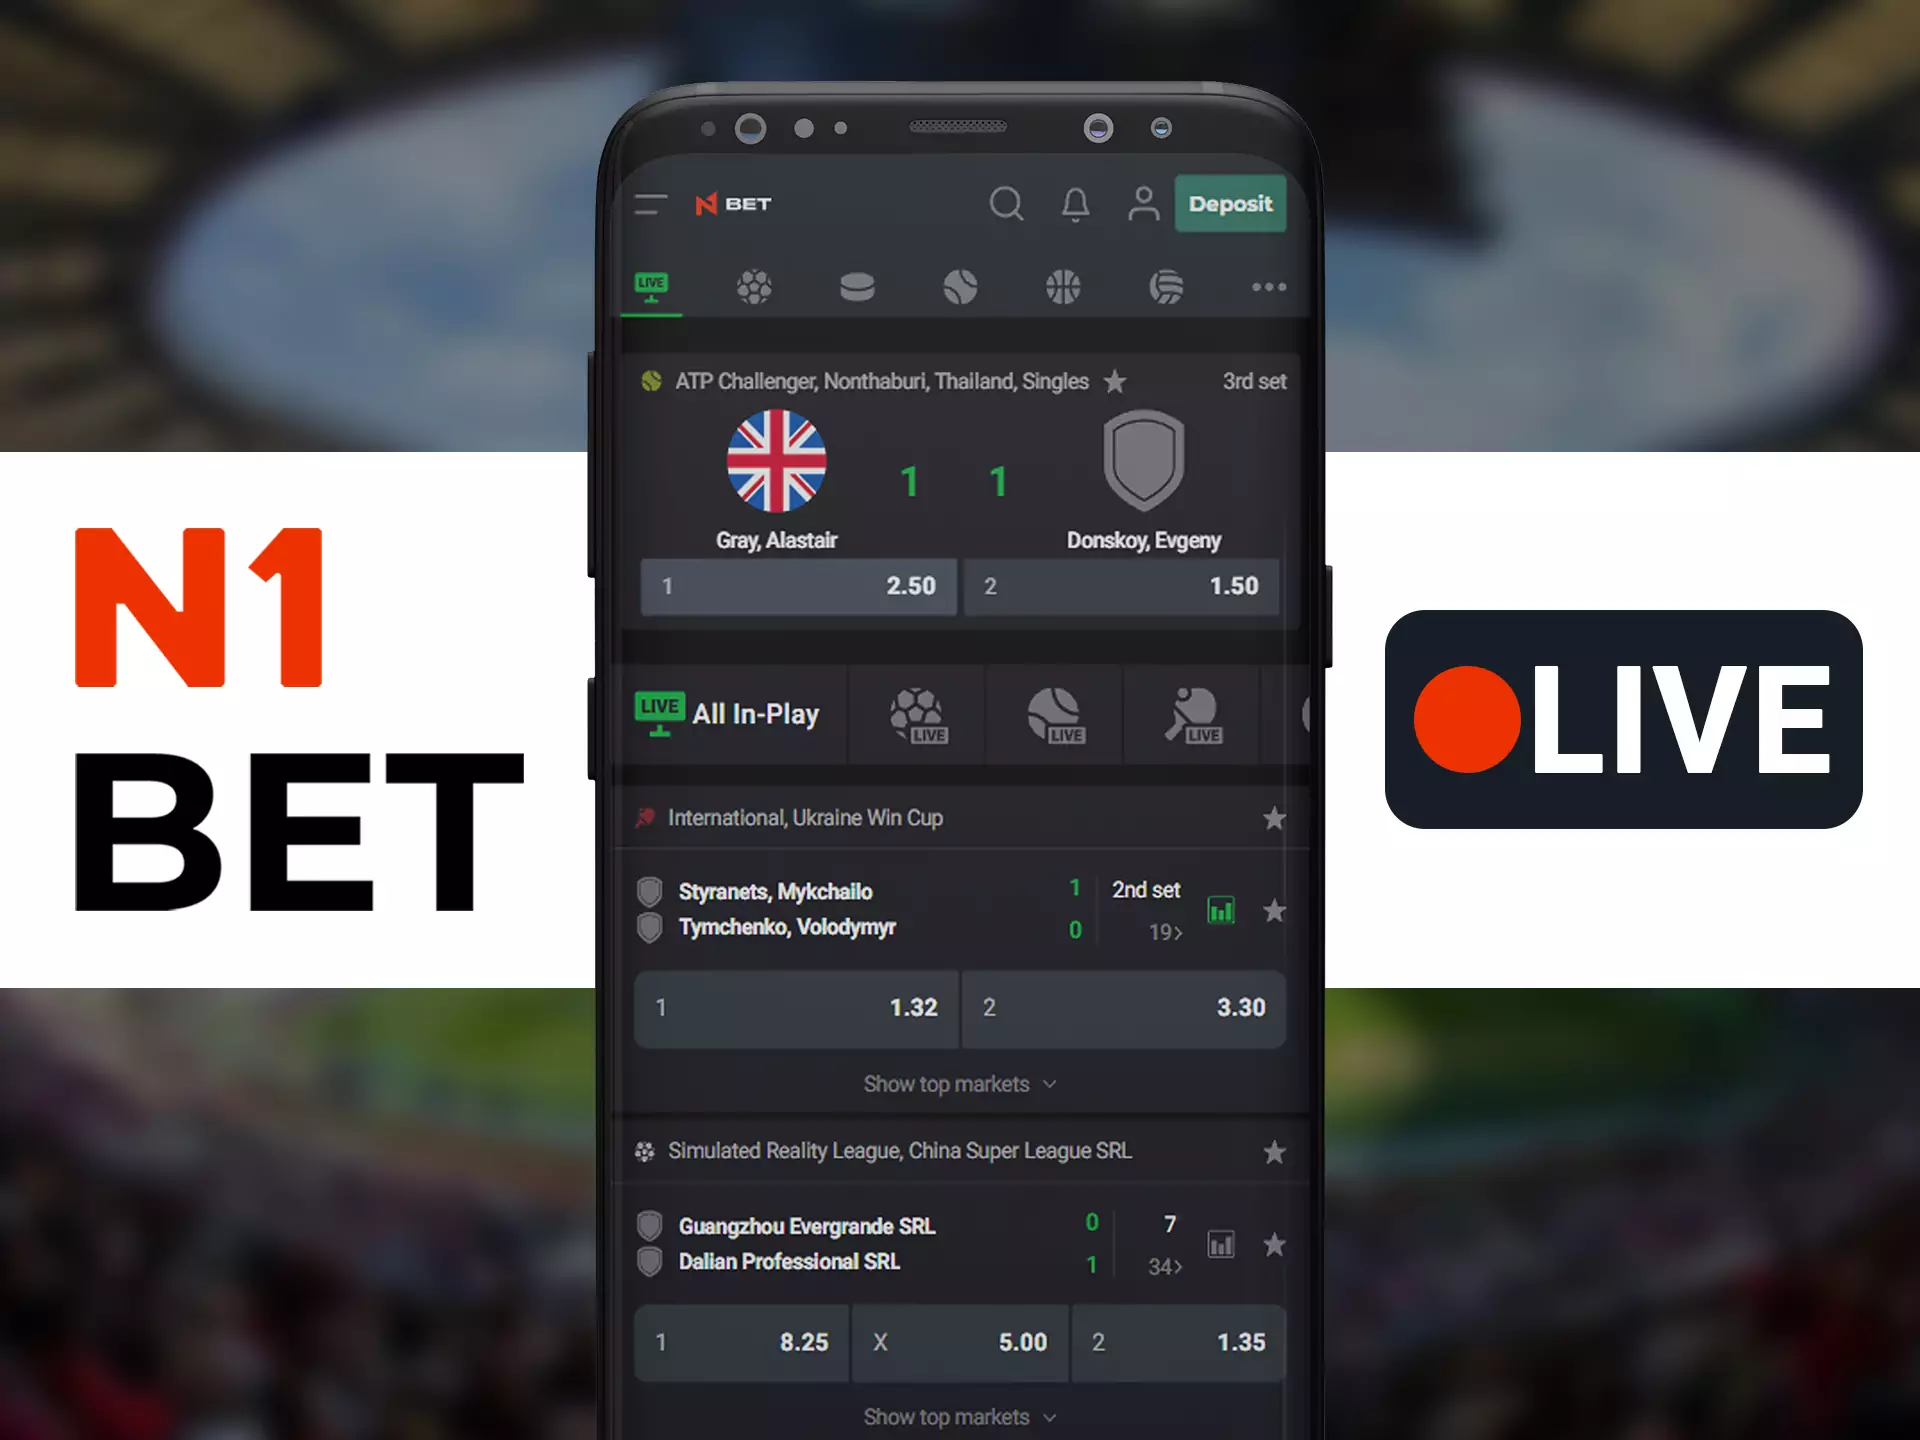 Bet in live format at N1Bet.